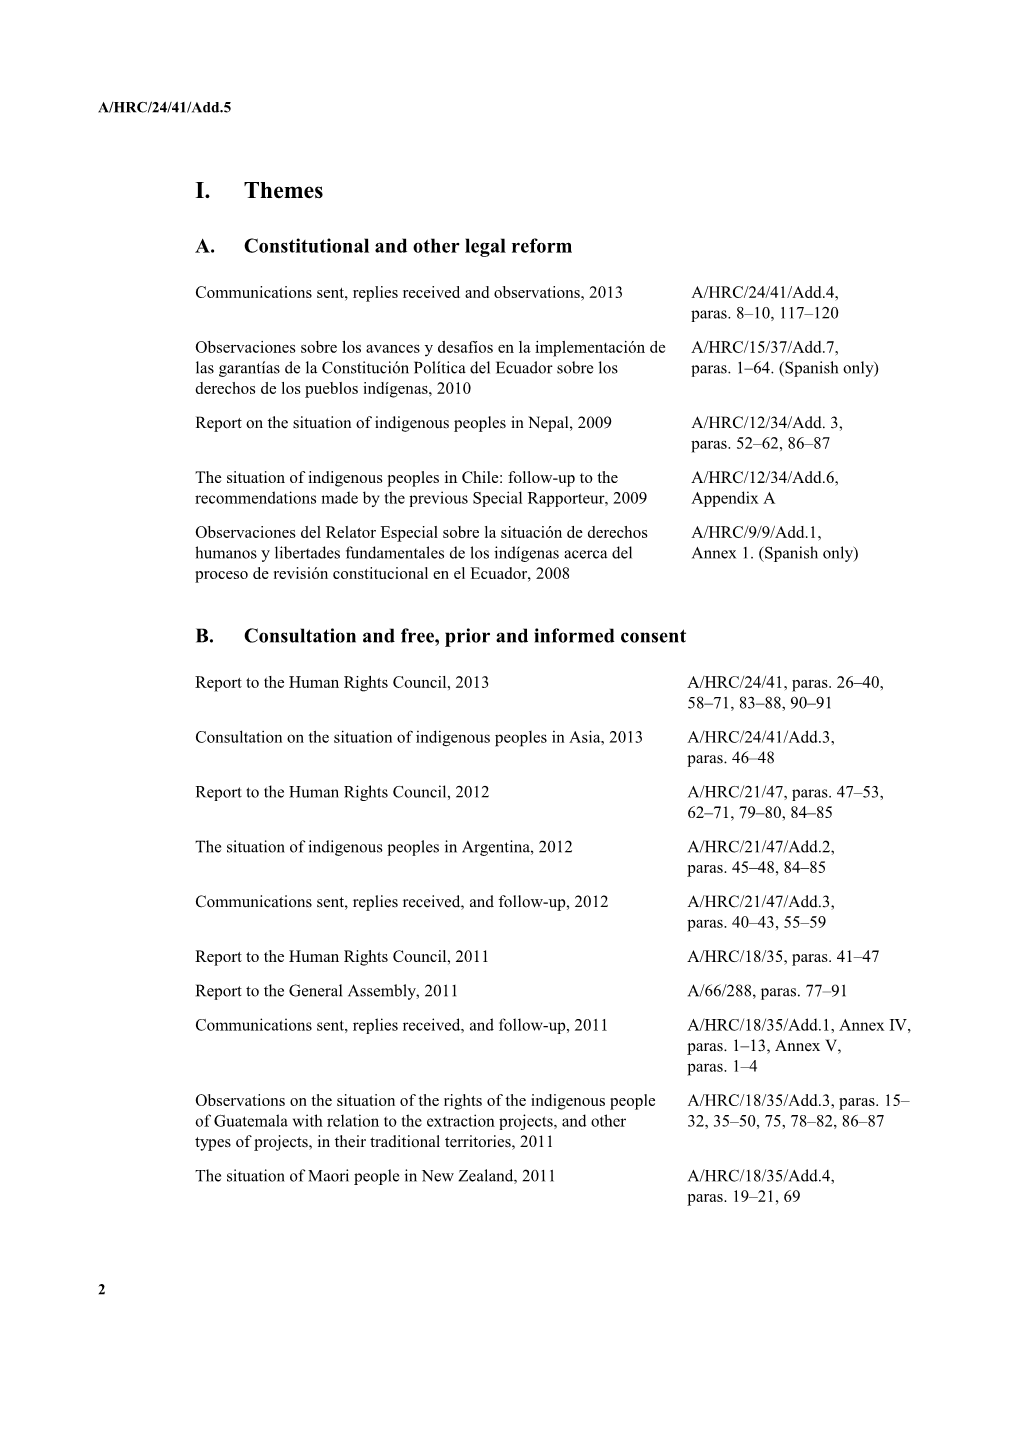 Index of Reports of the Special Rapporteur on the Rights of Indigenous Peoples by Theme